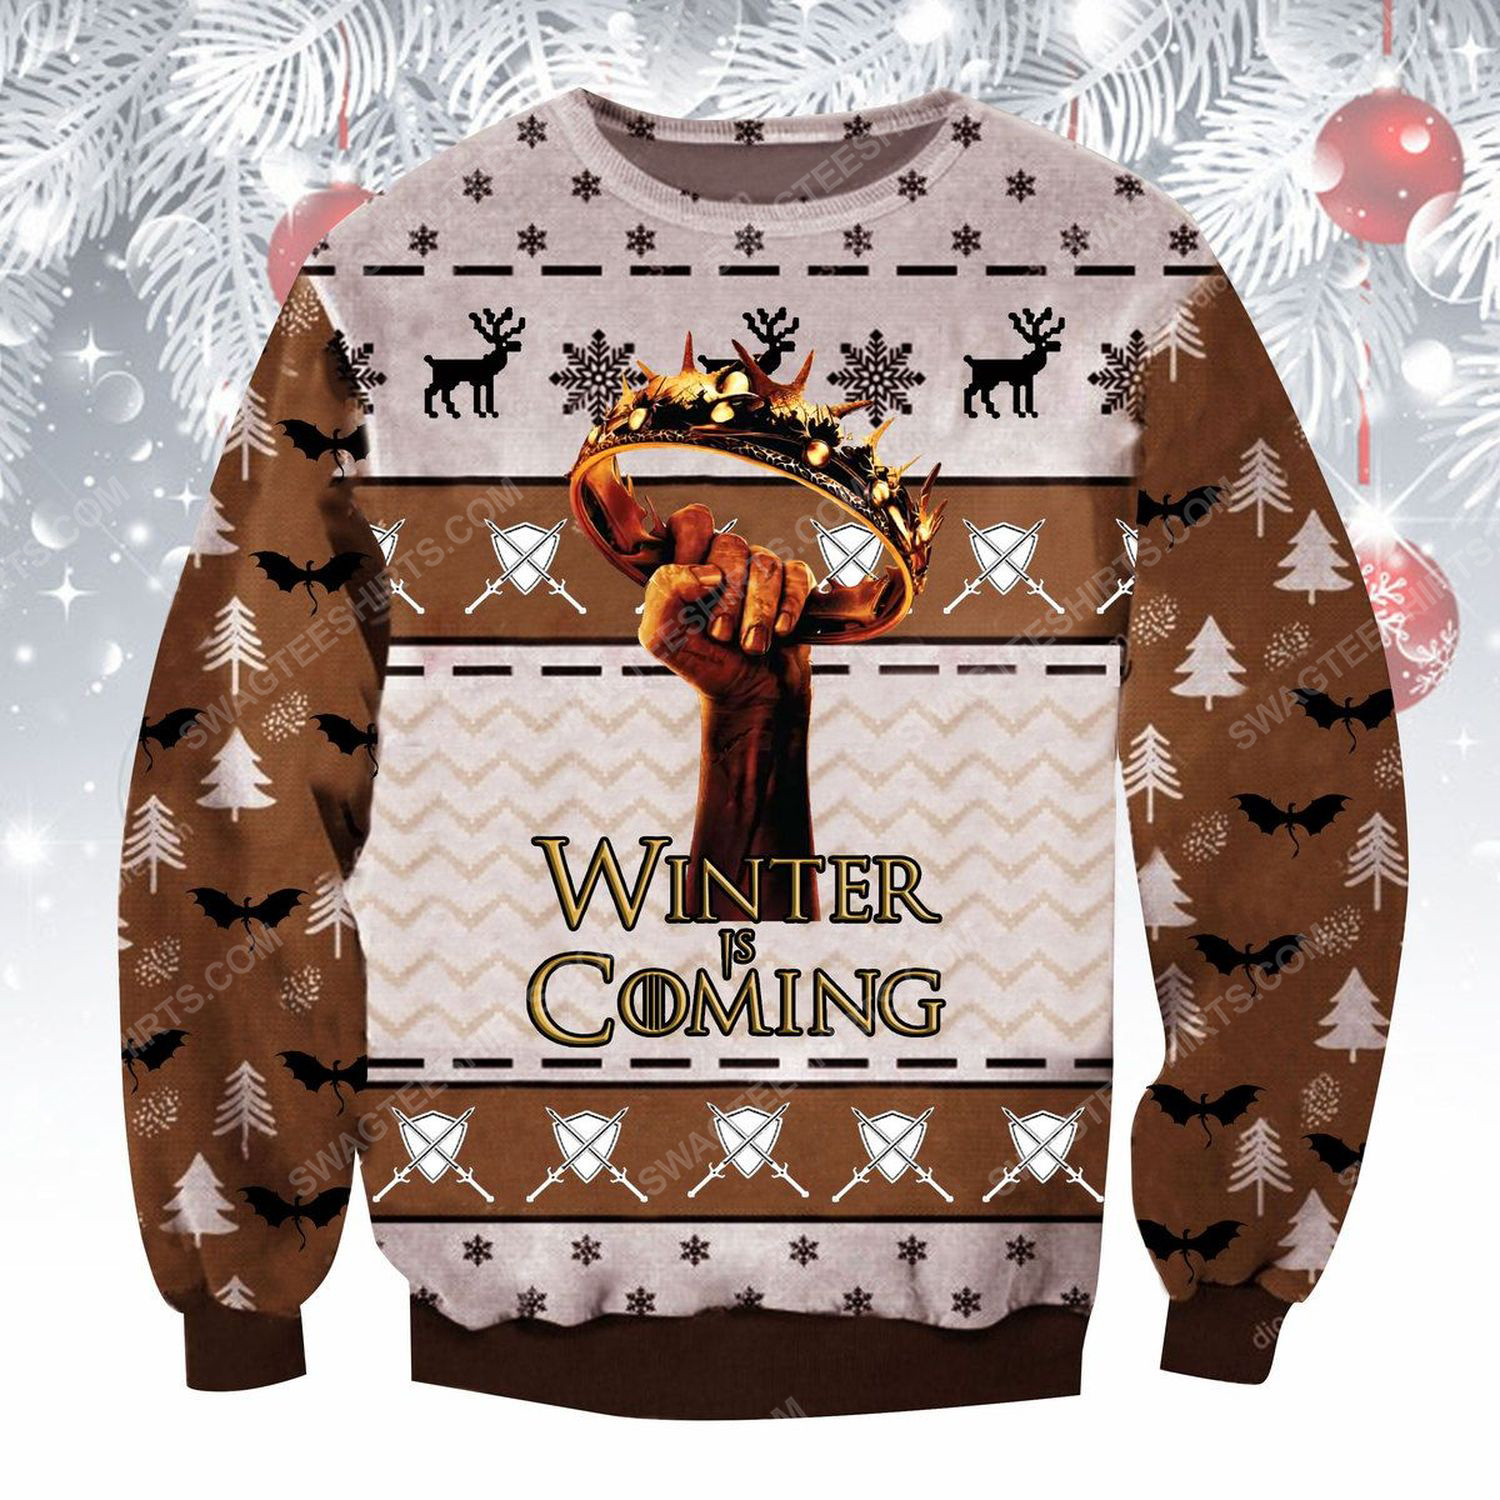 Winter is coming game of thrones ​ugly christmas sweater - Copy (2)